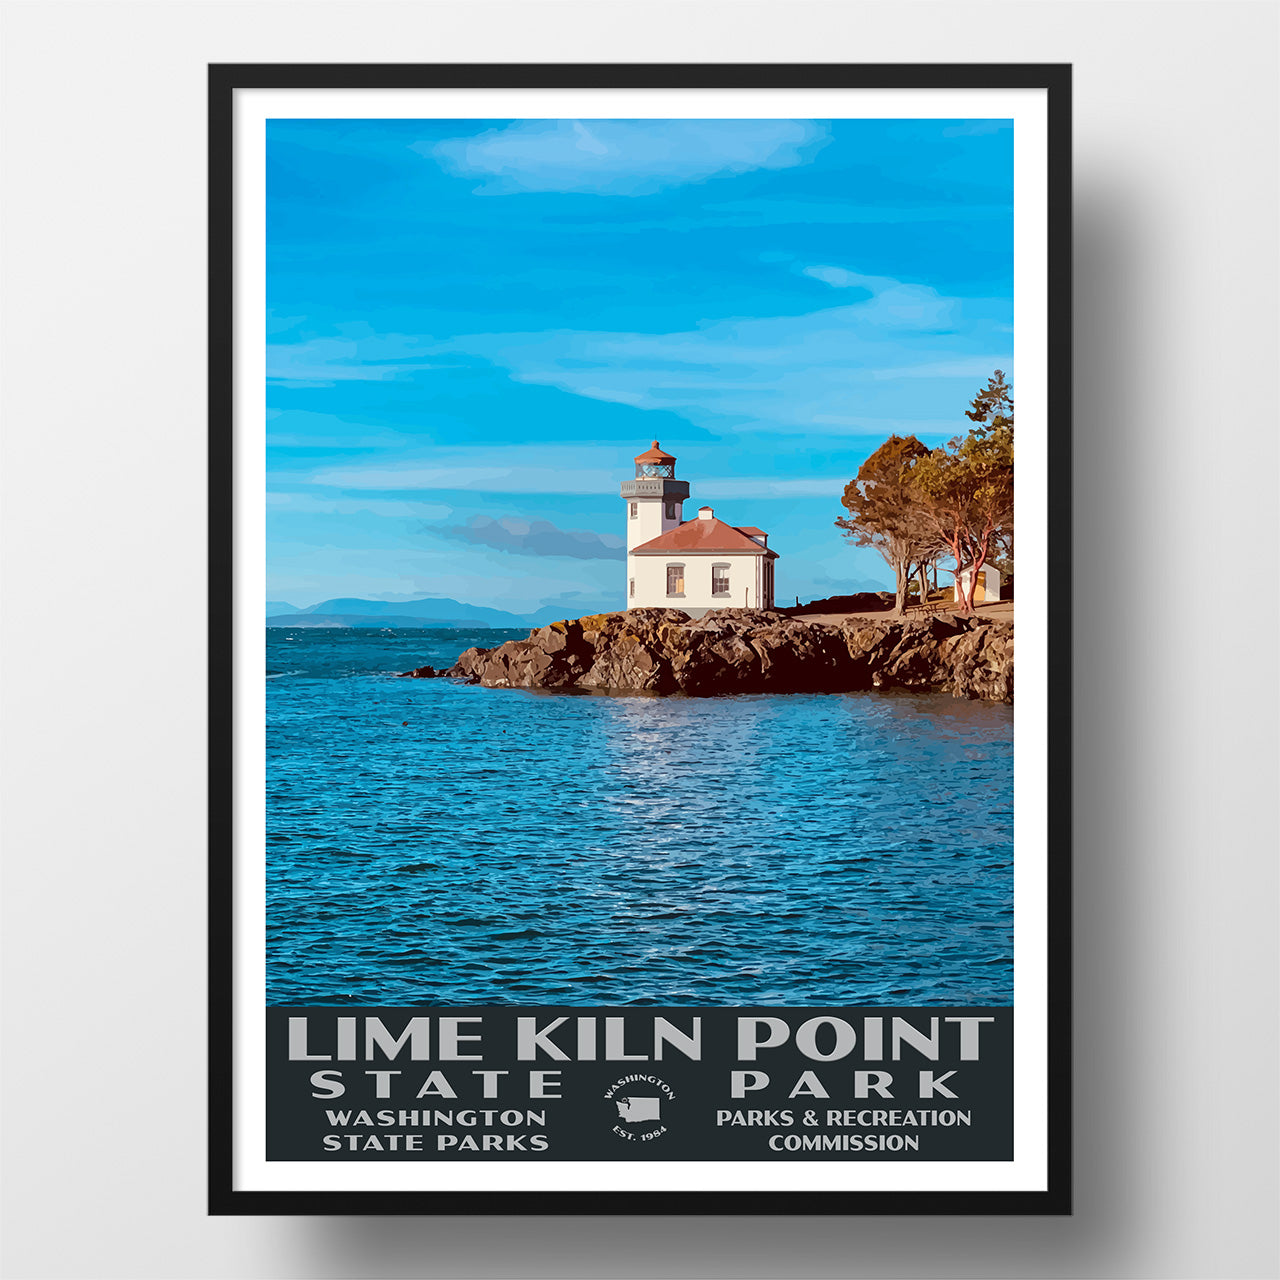 lime kiln point state park poster